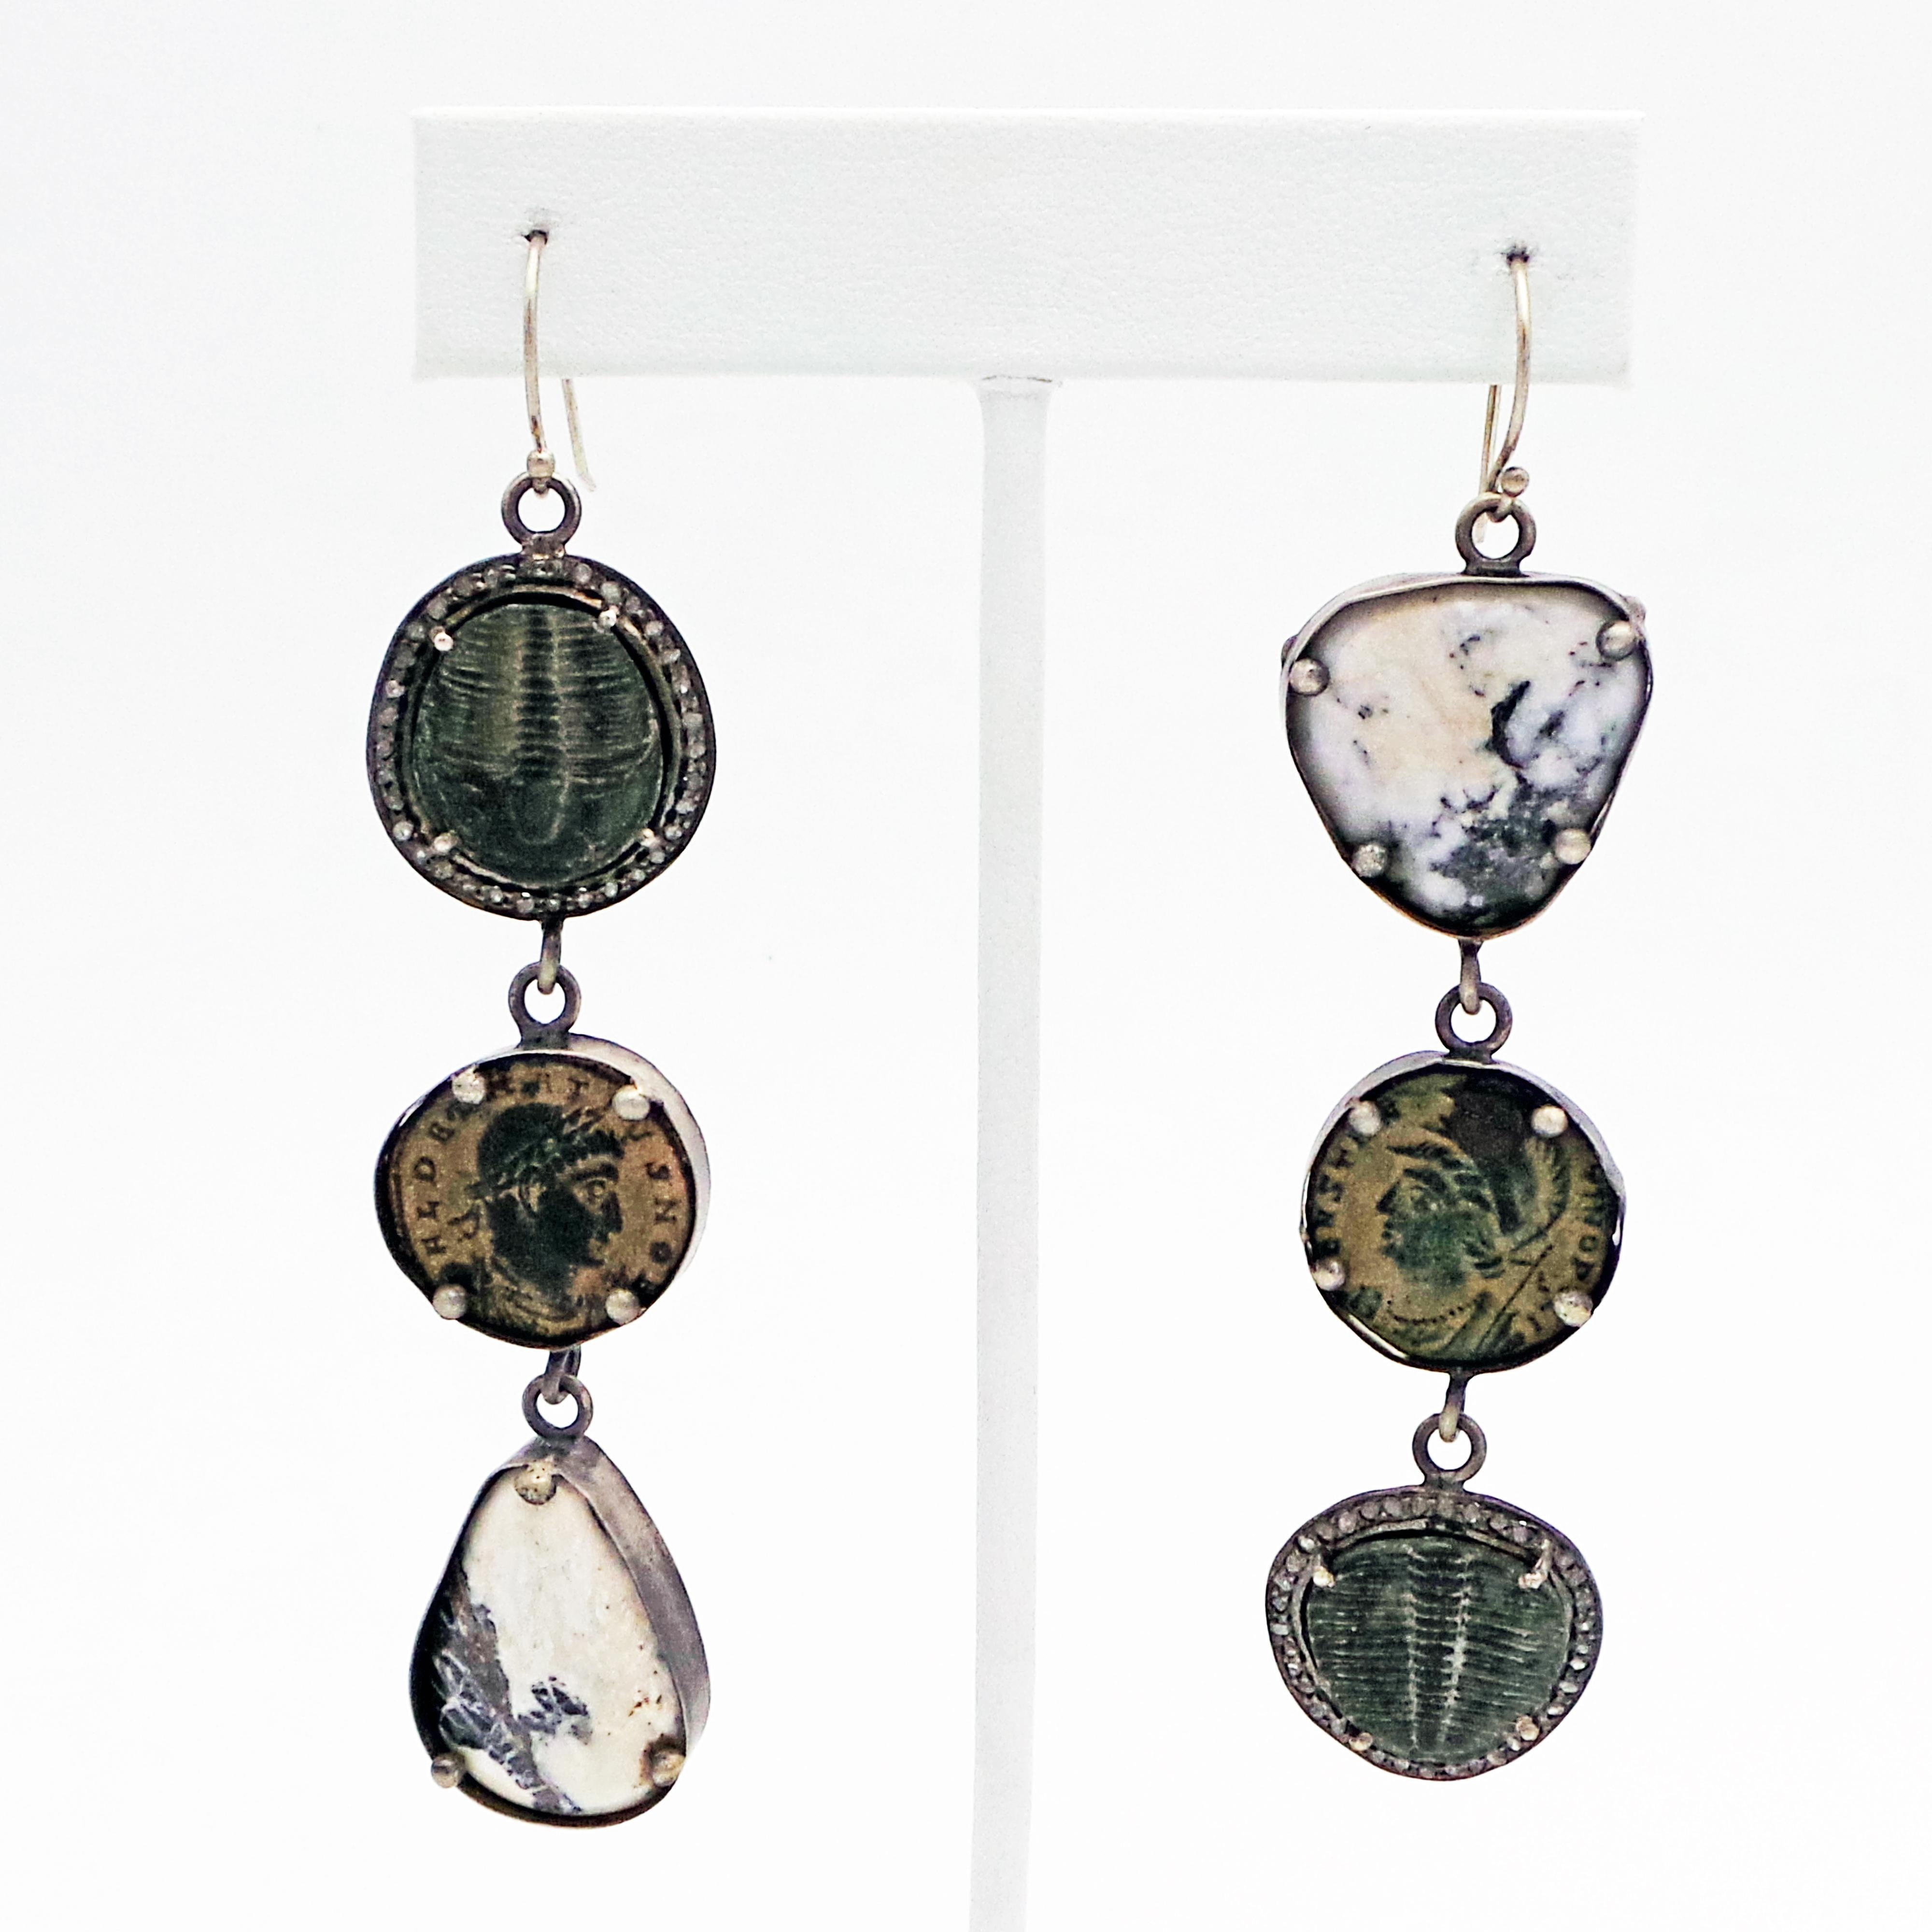 3-tier, oxidized sterling silver Bohemian dangle earrings featuring White Buffalo Turquoise, Trilobite Fossils with Diamond halos and authentic ancient Roman bronze coins. One-of-a-kind, unique dangle earrings with cool monochrome and neutral color